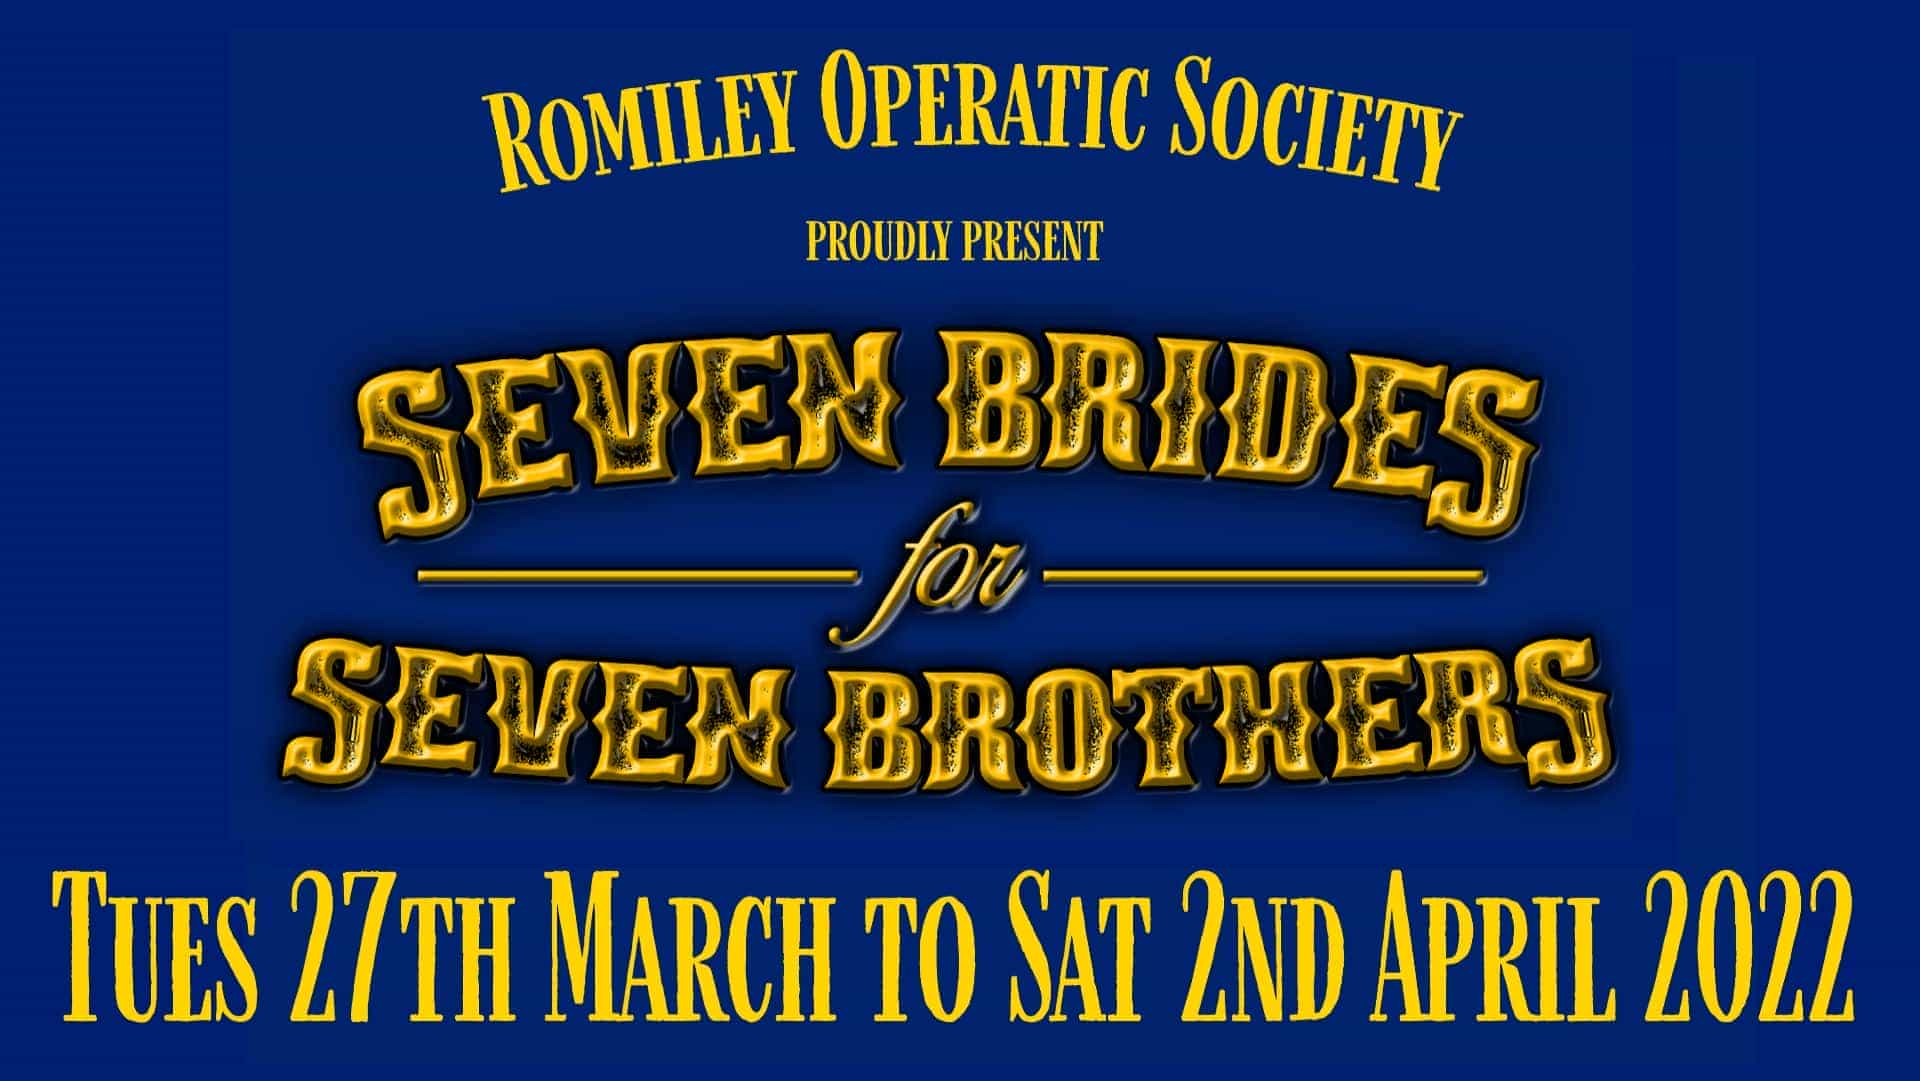 Romiley Operatic Society - Seven Brides for Seven Brothers